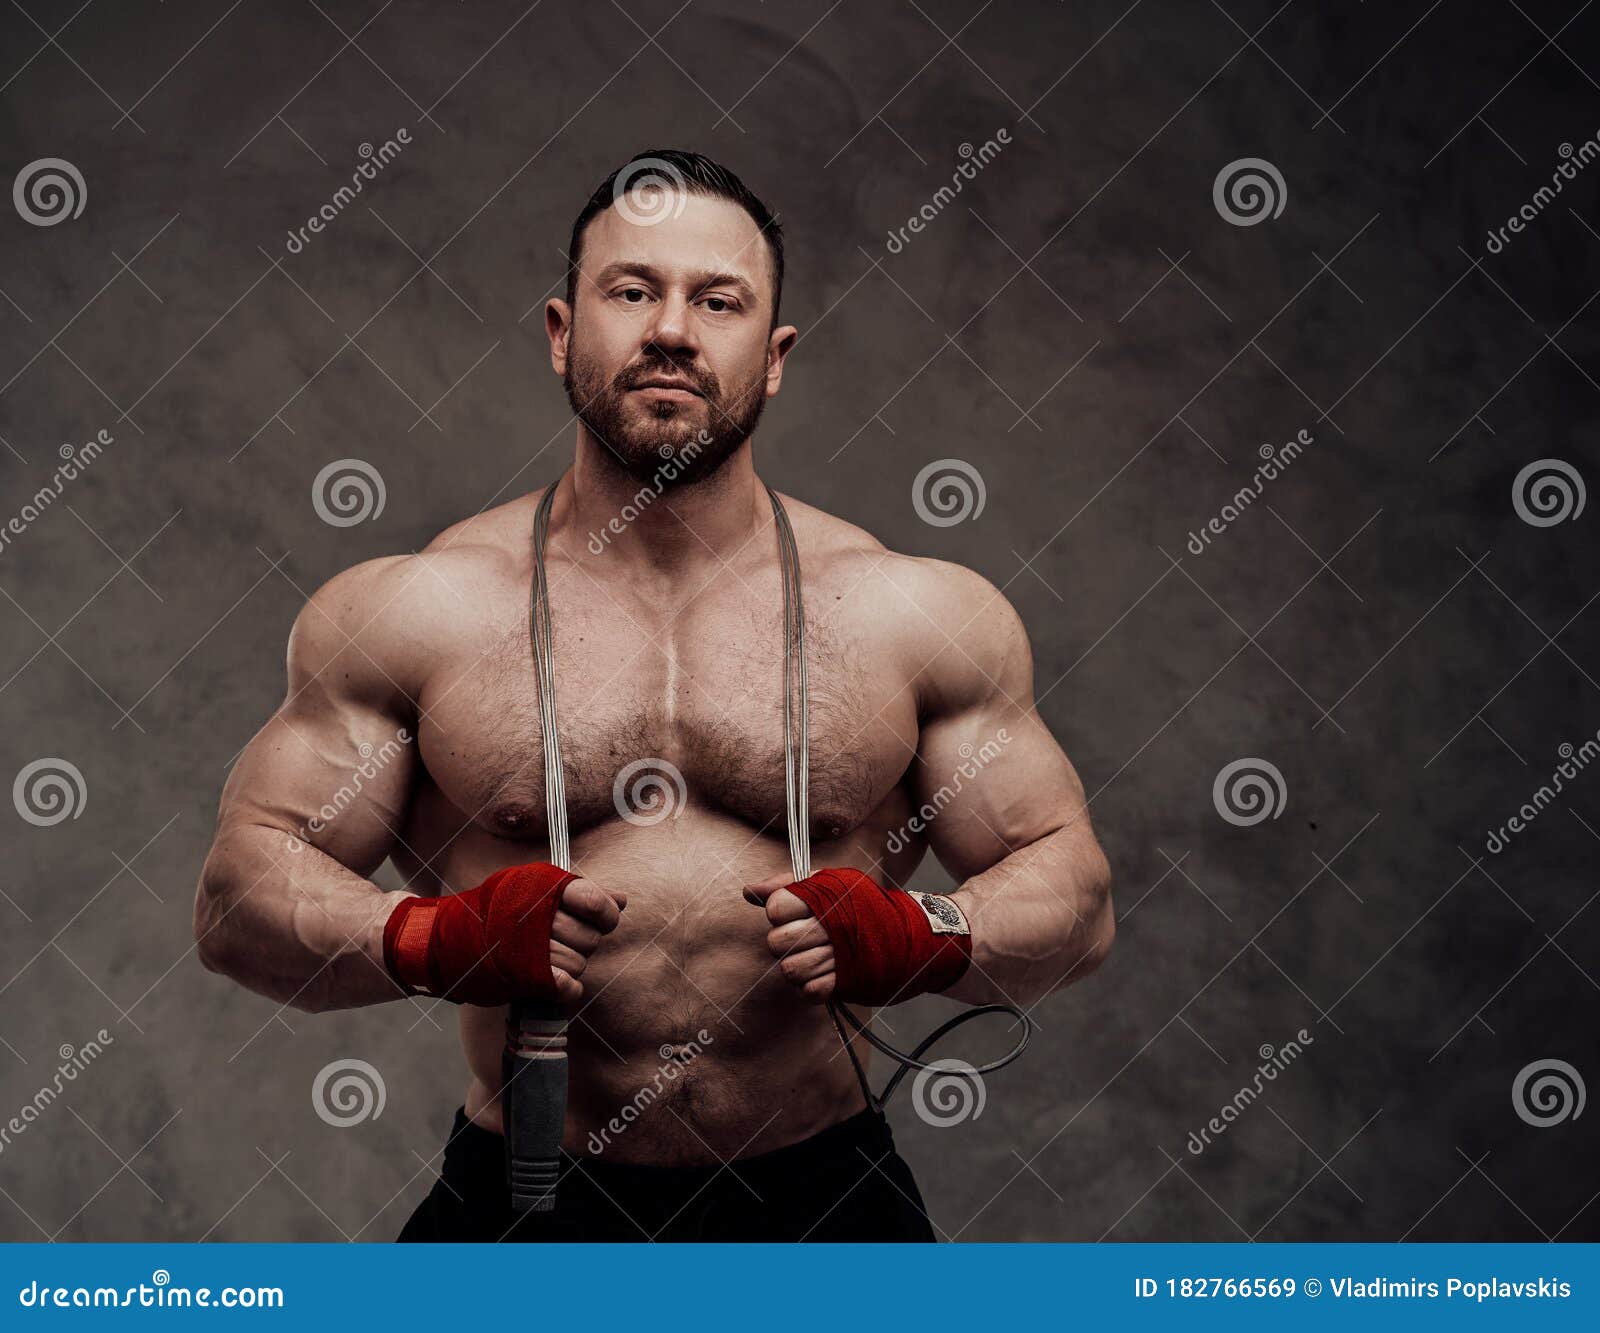 1600px x 1334px - Bodybuilder with Big Muscles and Naked Torso in a Studio Stock Image -  Image of fitness, energetic: 182766569